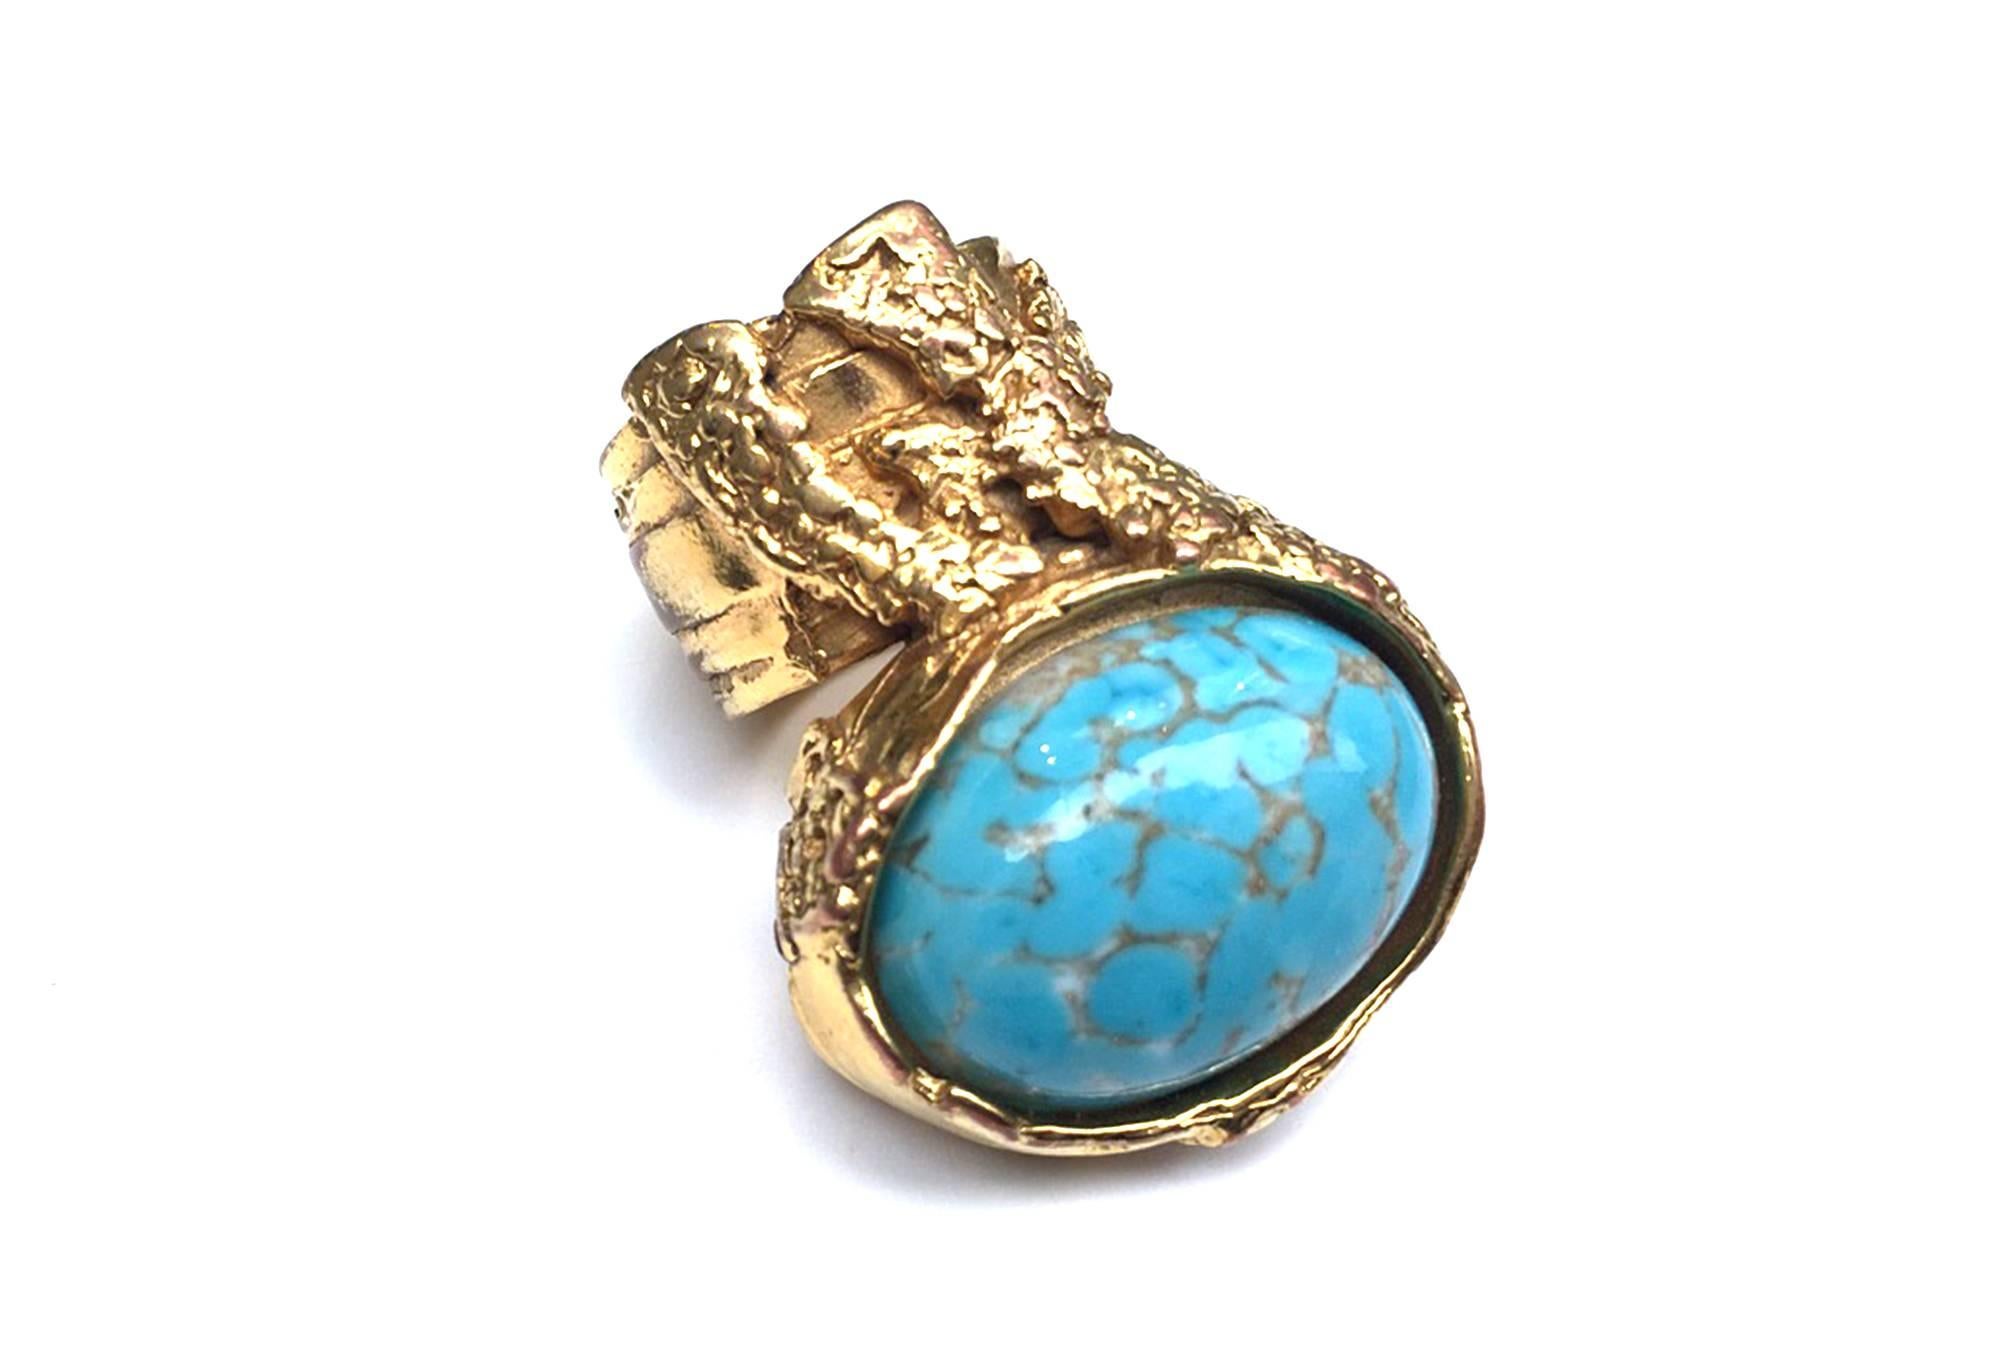  YSL Arty Oval Ring with Turquoise Stone & Gold-Toned Finished Metal by Stefano Pilati for YSL.  Pilati is trying to show the relevance of the heritage through a contemporary eye.
Large, US size 9, EU size 60.